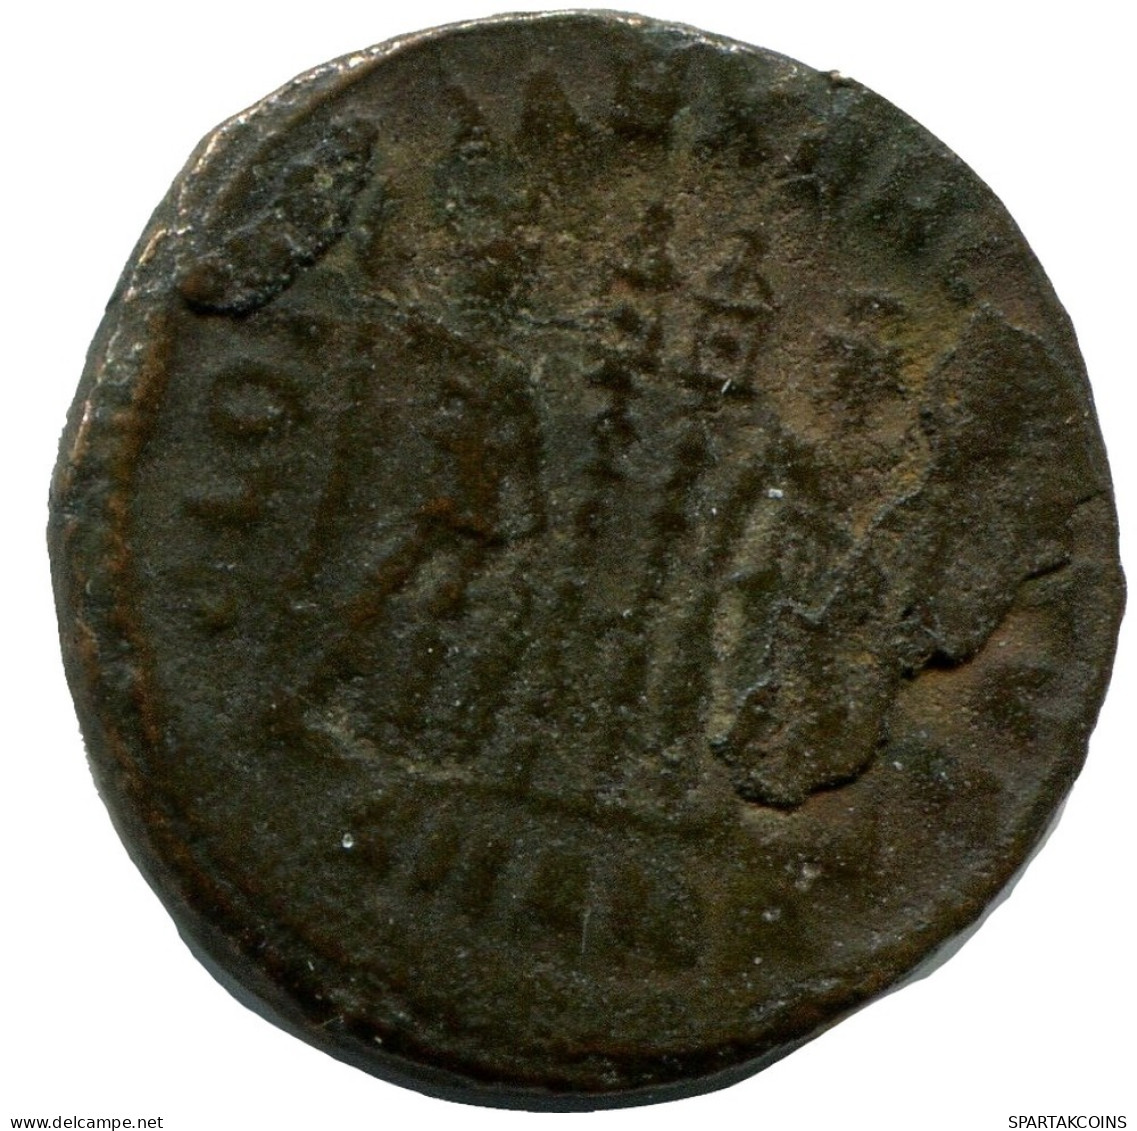 CONSTANTINE I MINTED IN ANTIOCH FOUND IN IHNASYAH HOARD EGYPT #ANC10623.14.D.A - El Imperio Christiano (307 / 363)